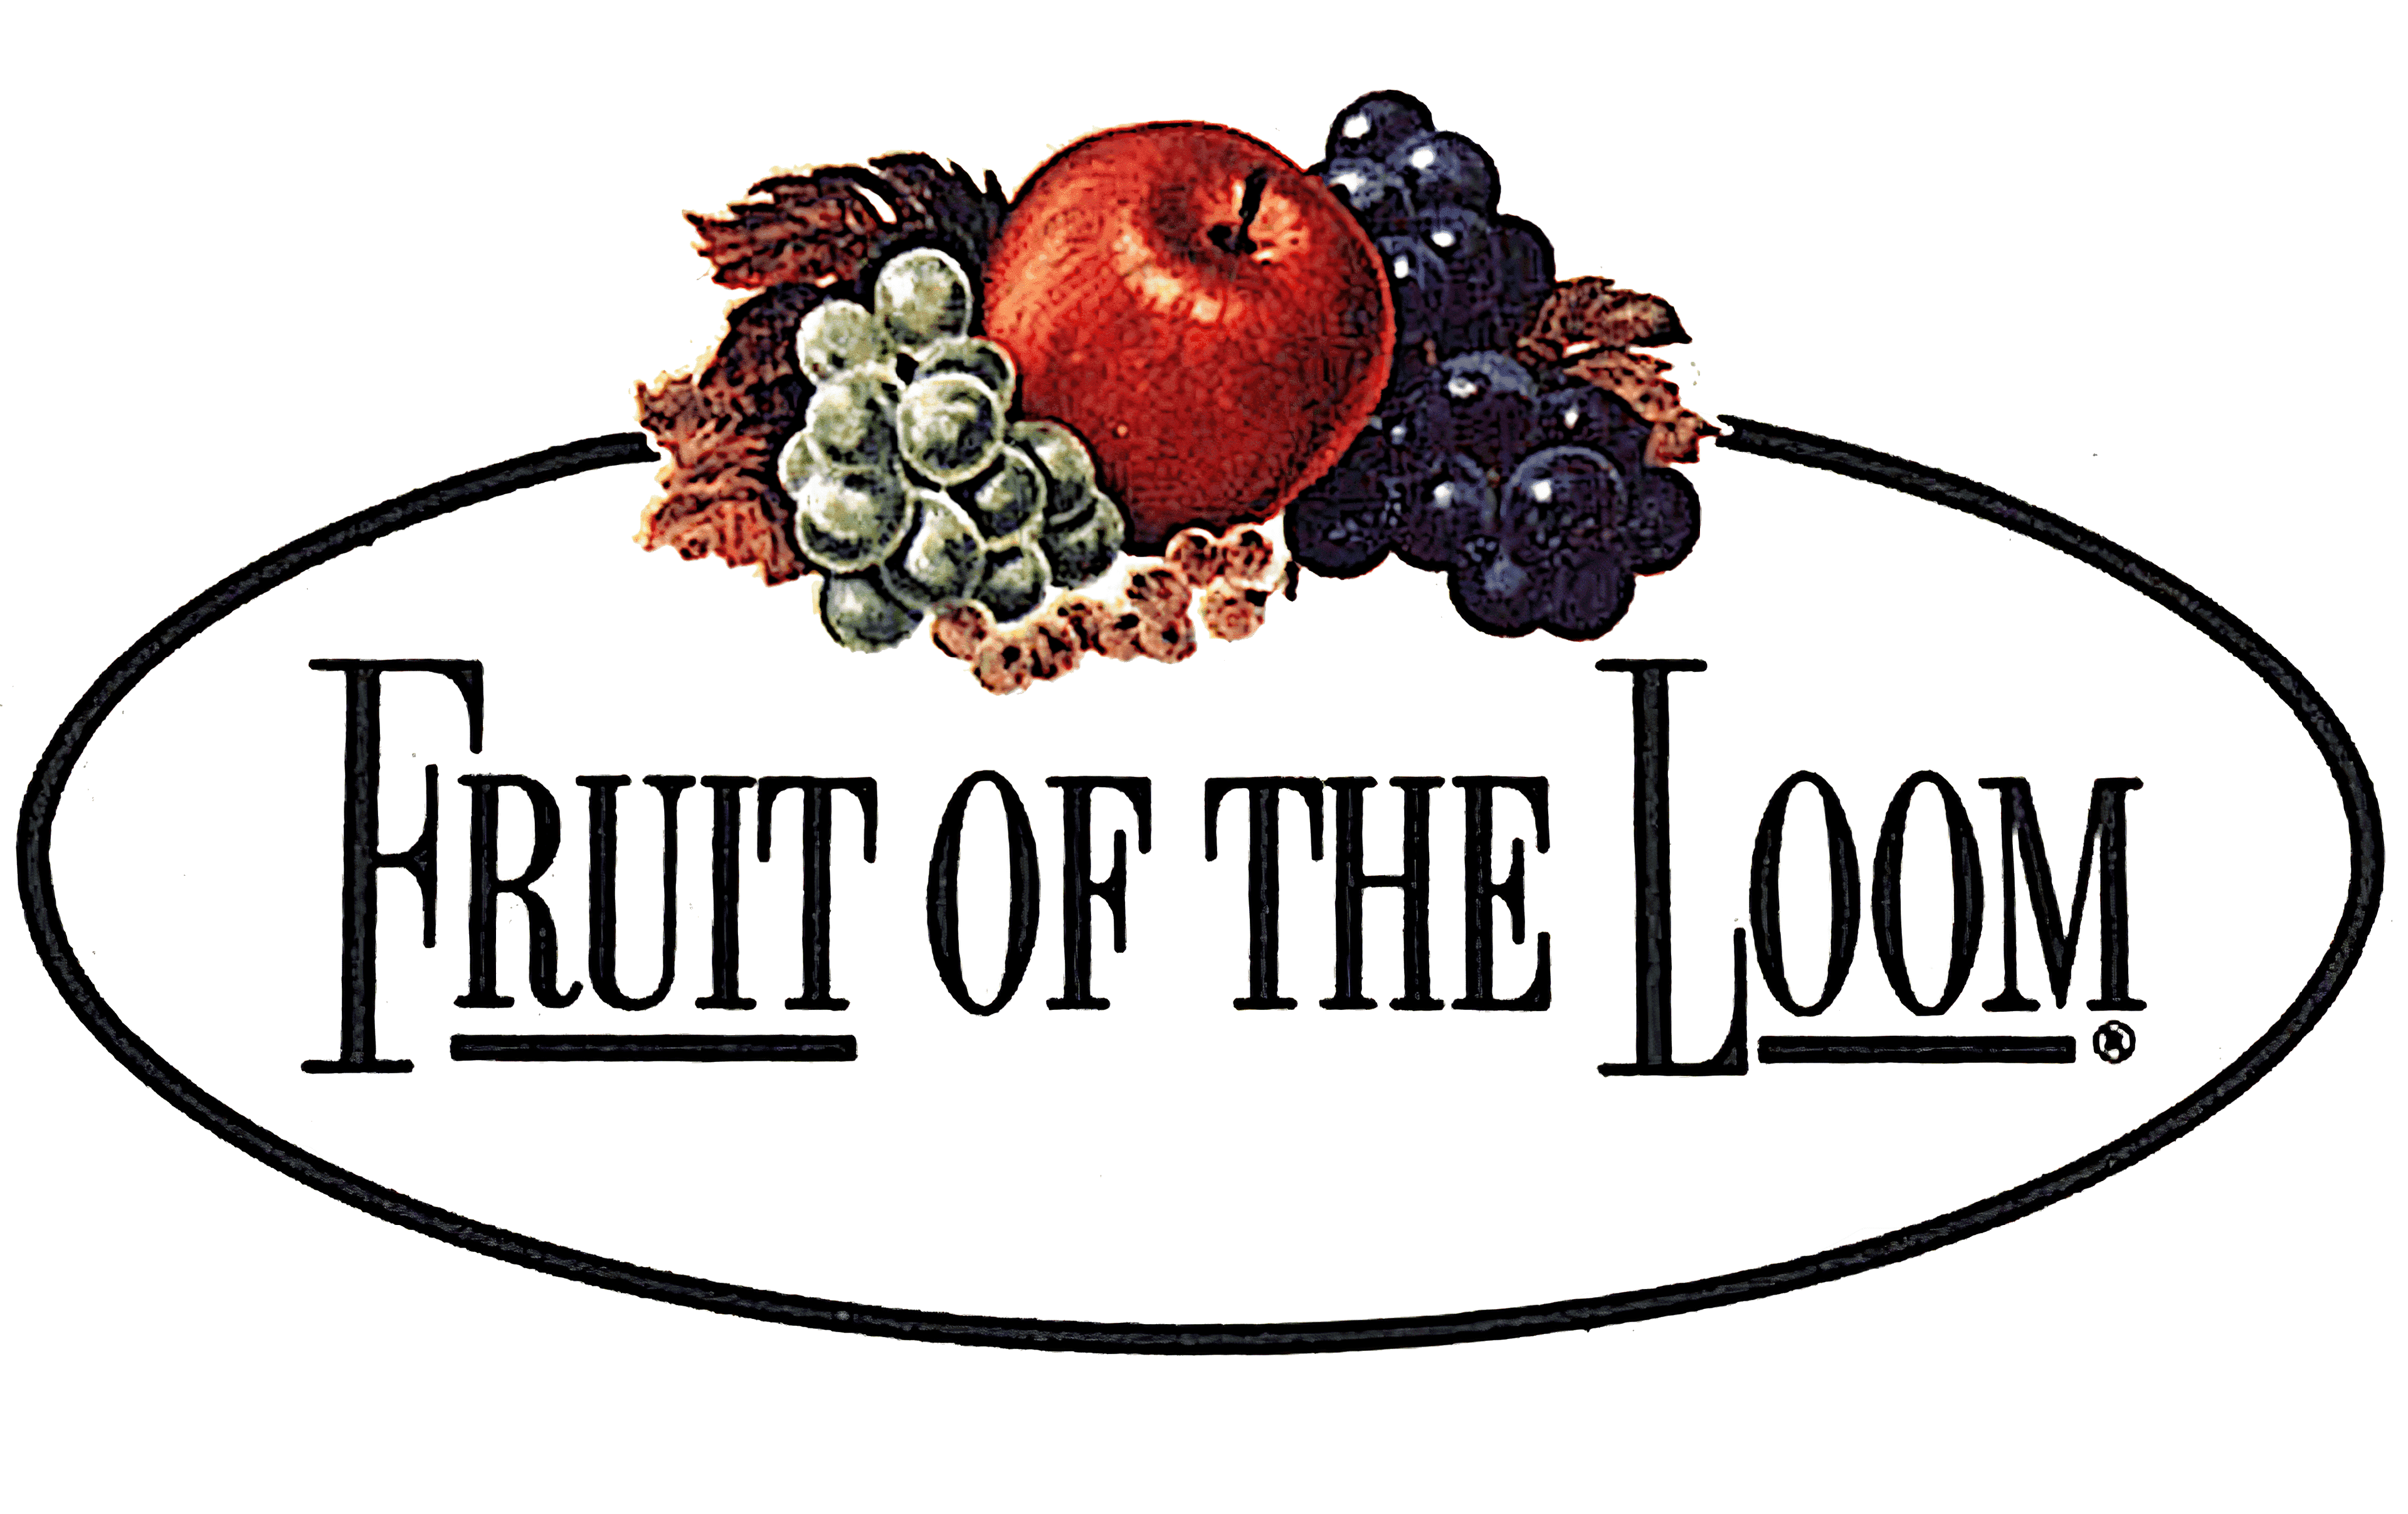 What is the significance of the fruit in Fruit of the Loom's logo? - Quora